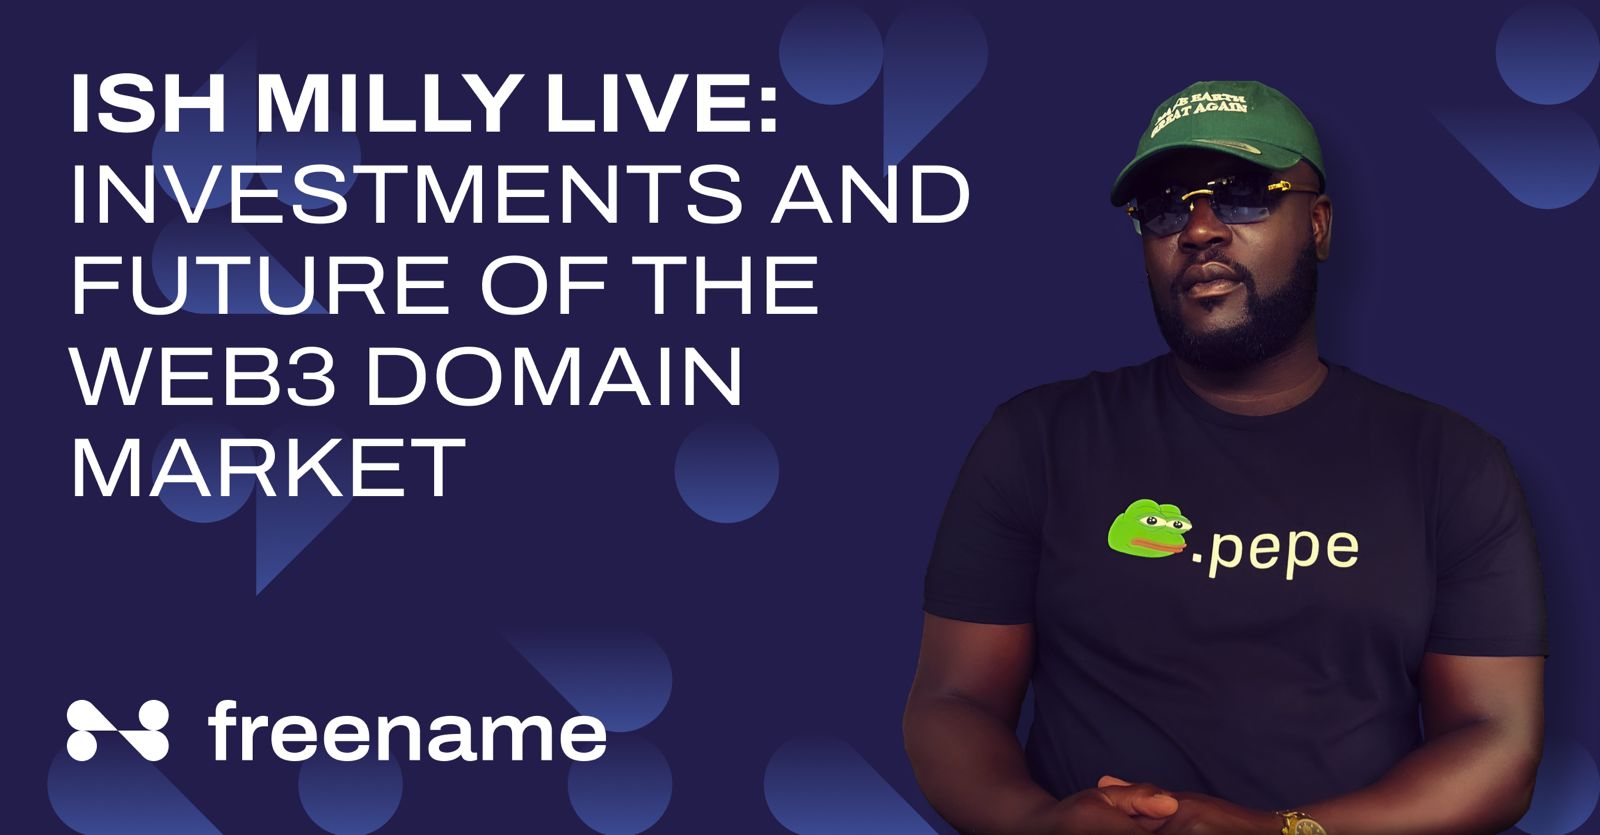 Ish Milly Live: Investments and Future of the Web3 Domain Market